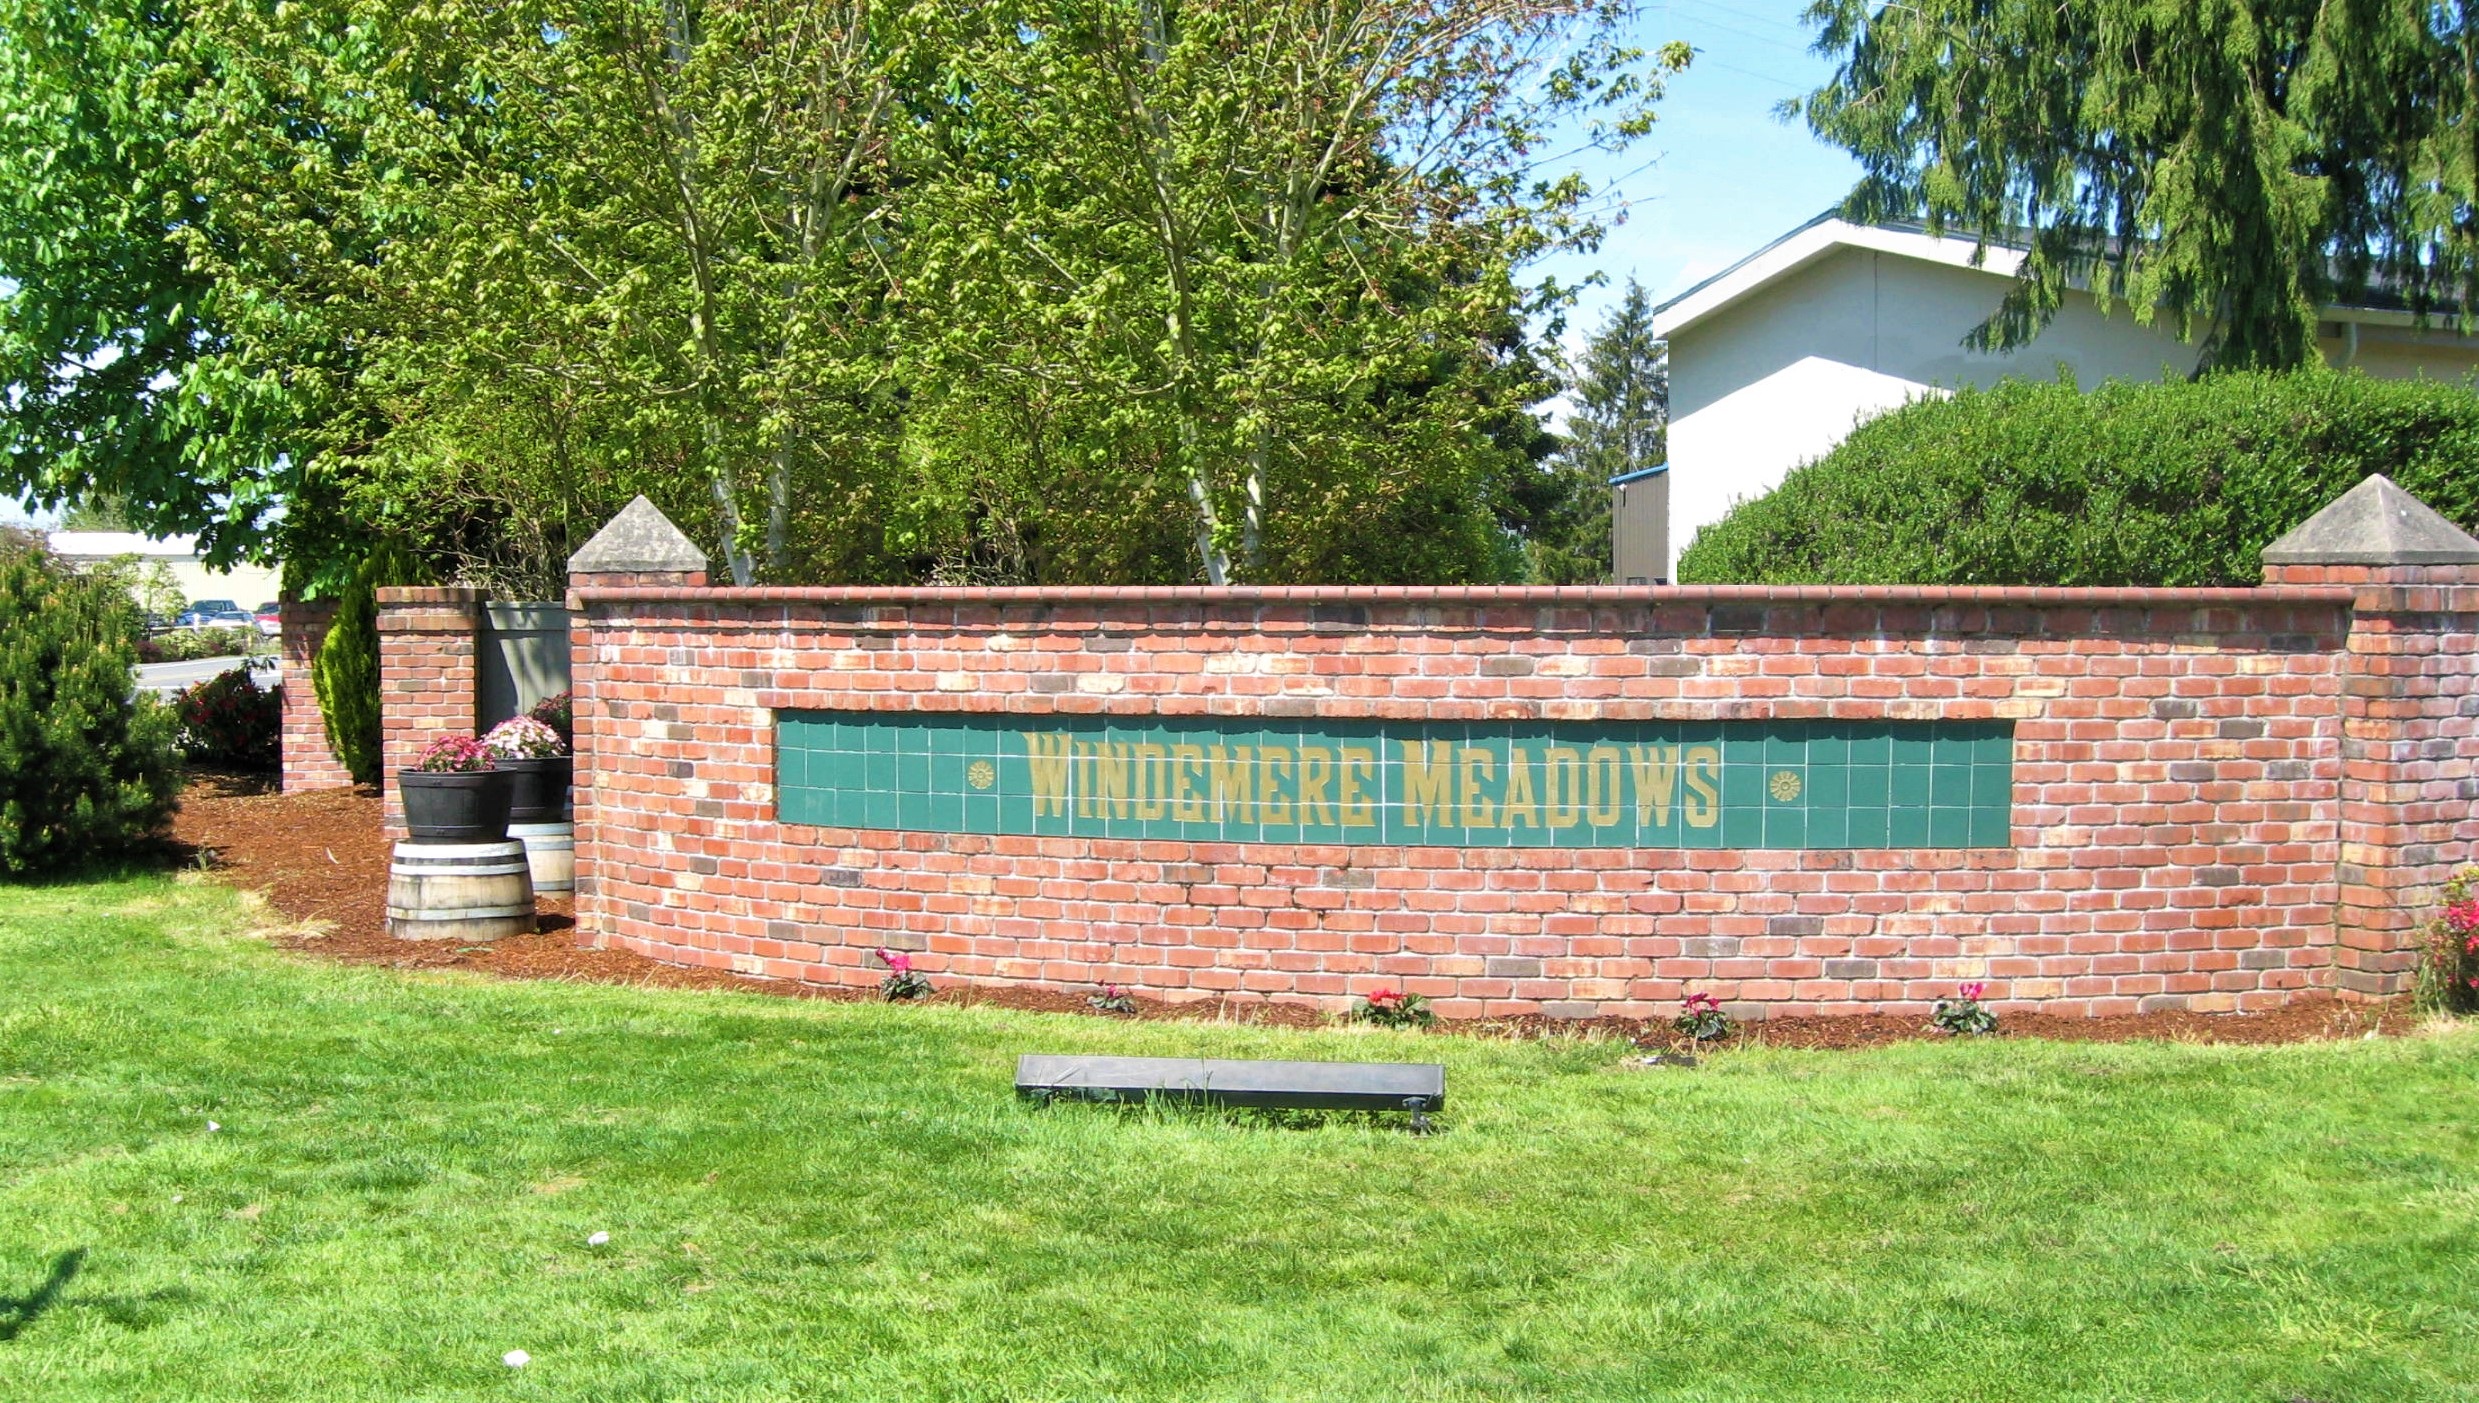 Windemere Meadows entrance sign